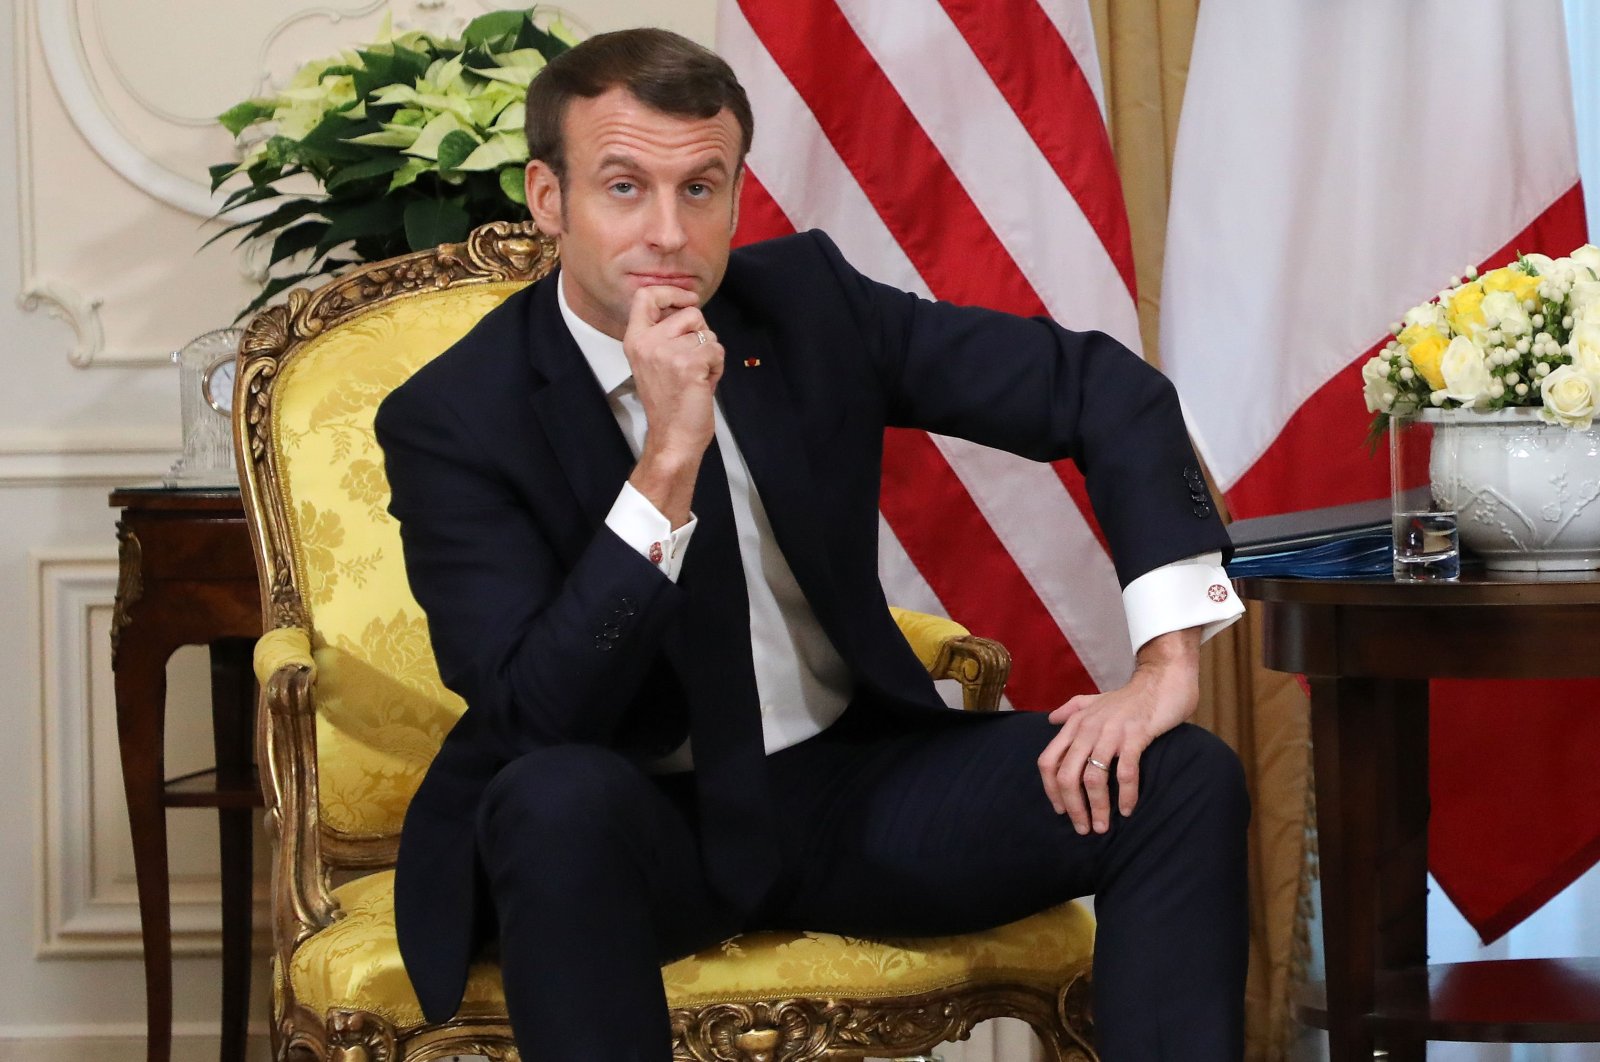 France's President Emmanuel Macron reacts as he talks with U.S. President Donald Trump during their meeting at Winfield House, London, U.K., Dec. 3, 2019. (AFP Photo)